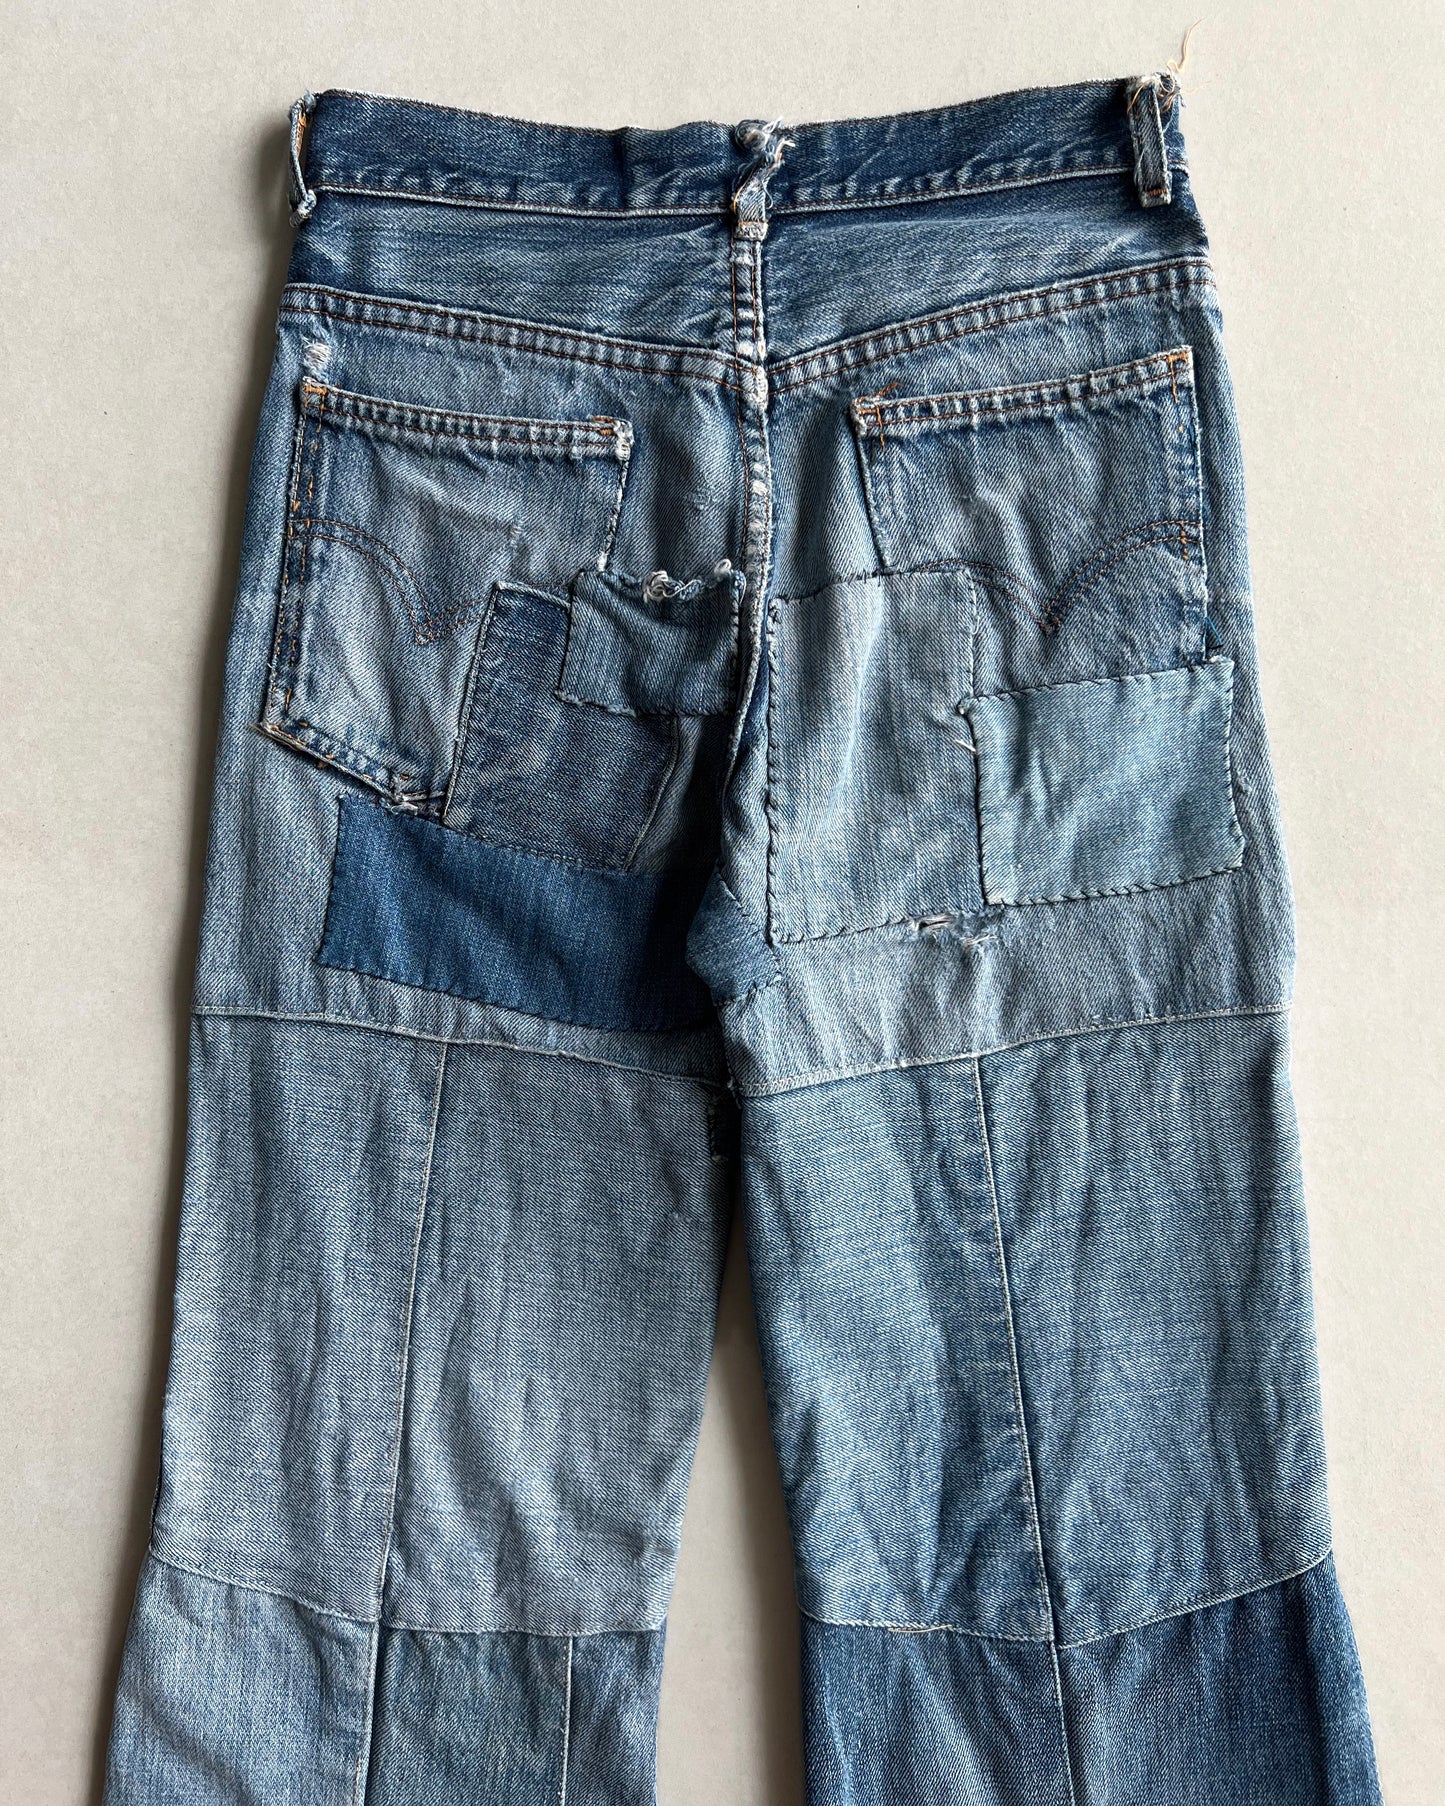 1970S LEVIS PATCHED BOOTCUT JEANS (27X35)